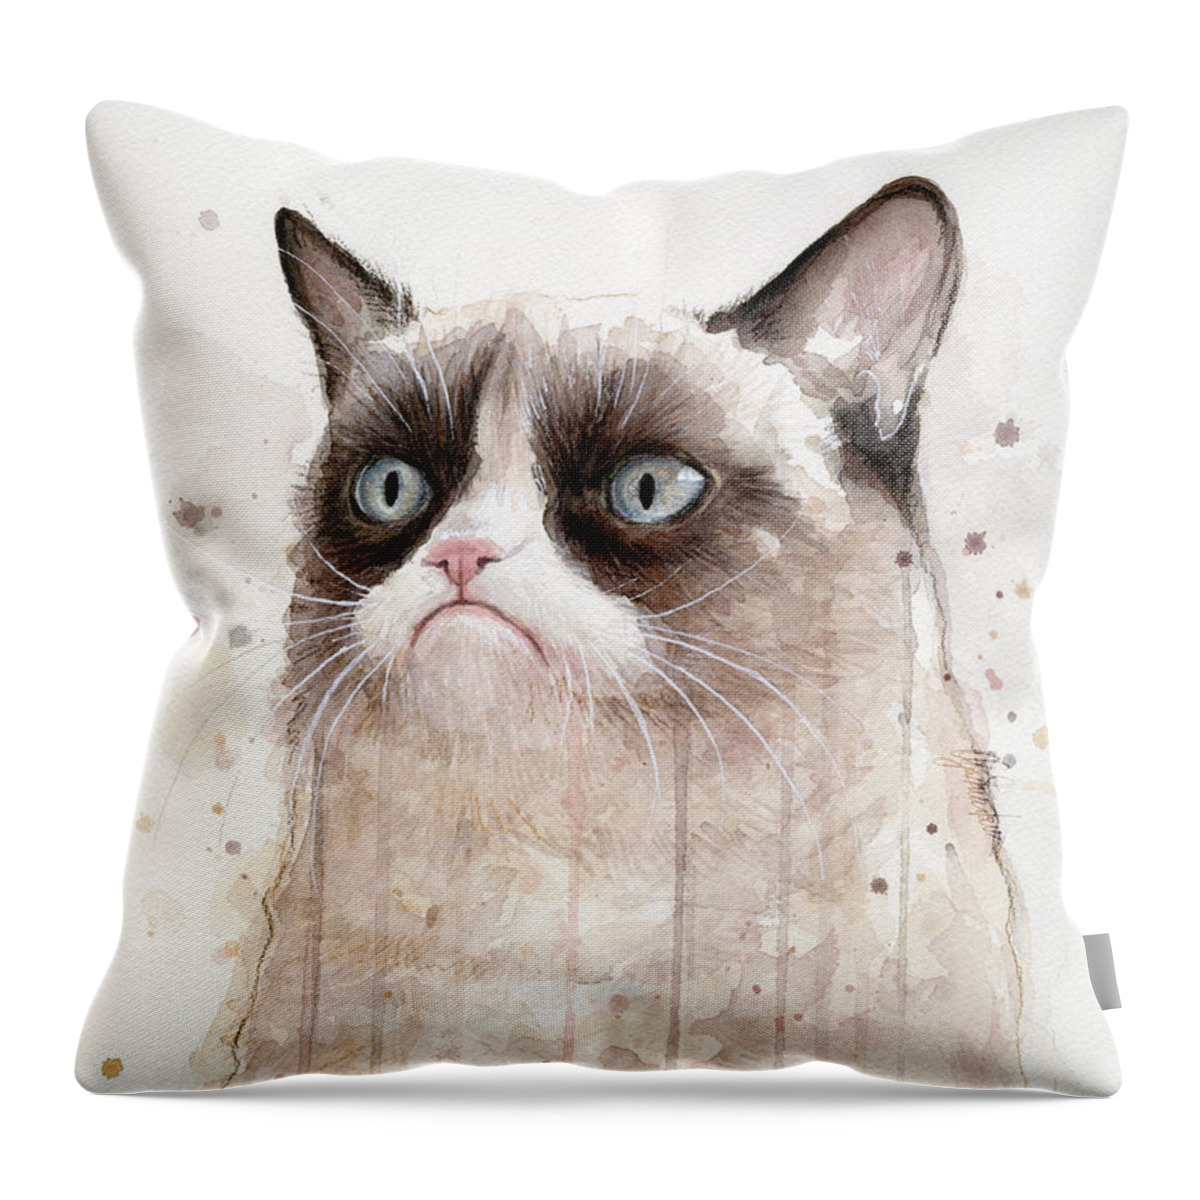 Grumpy Throw Pillow featuring the painting Grumpy Watercolor Cat by Olga Shvartsur